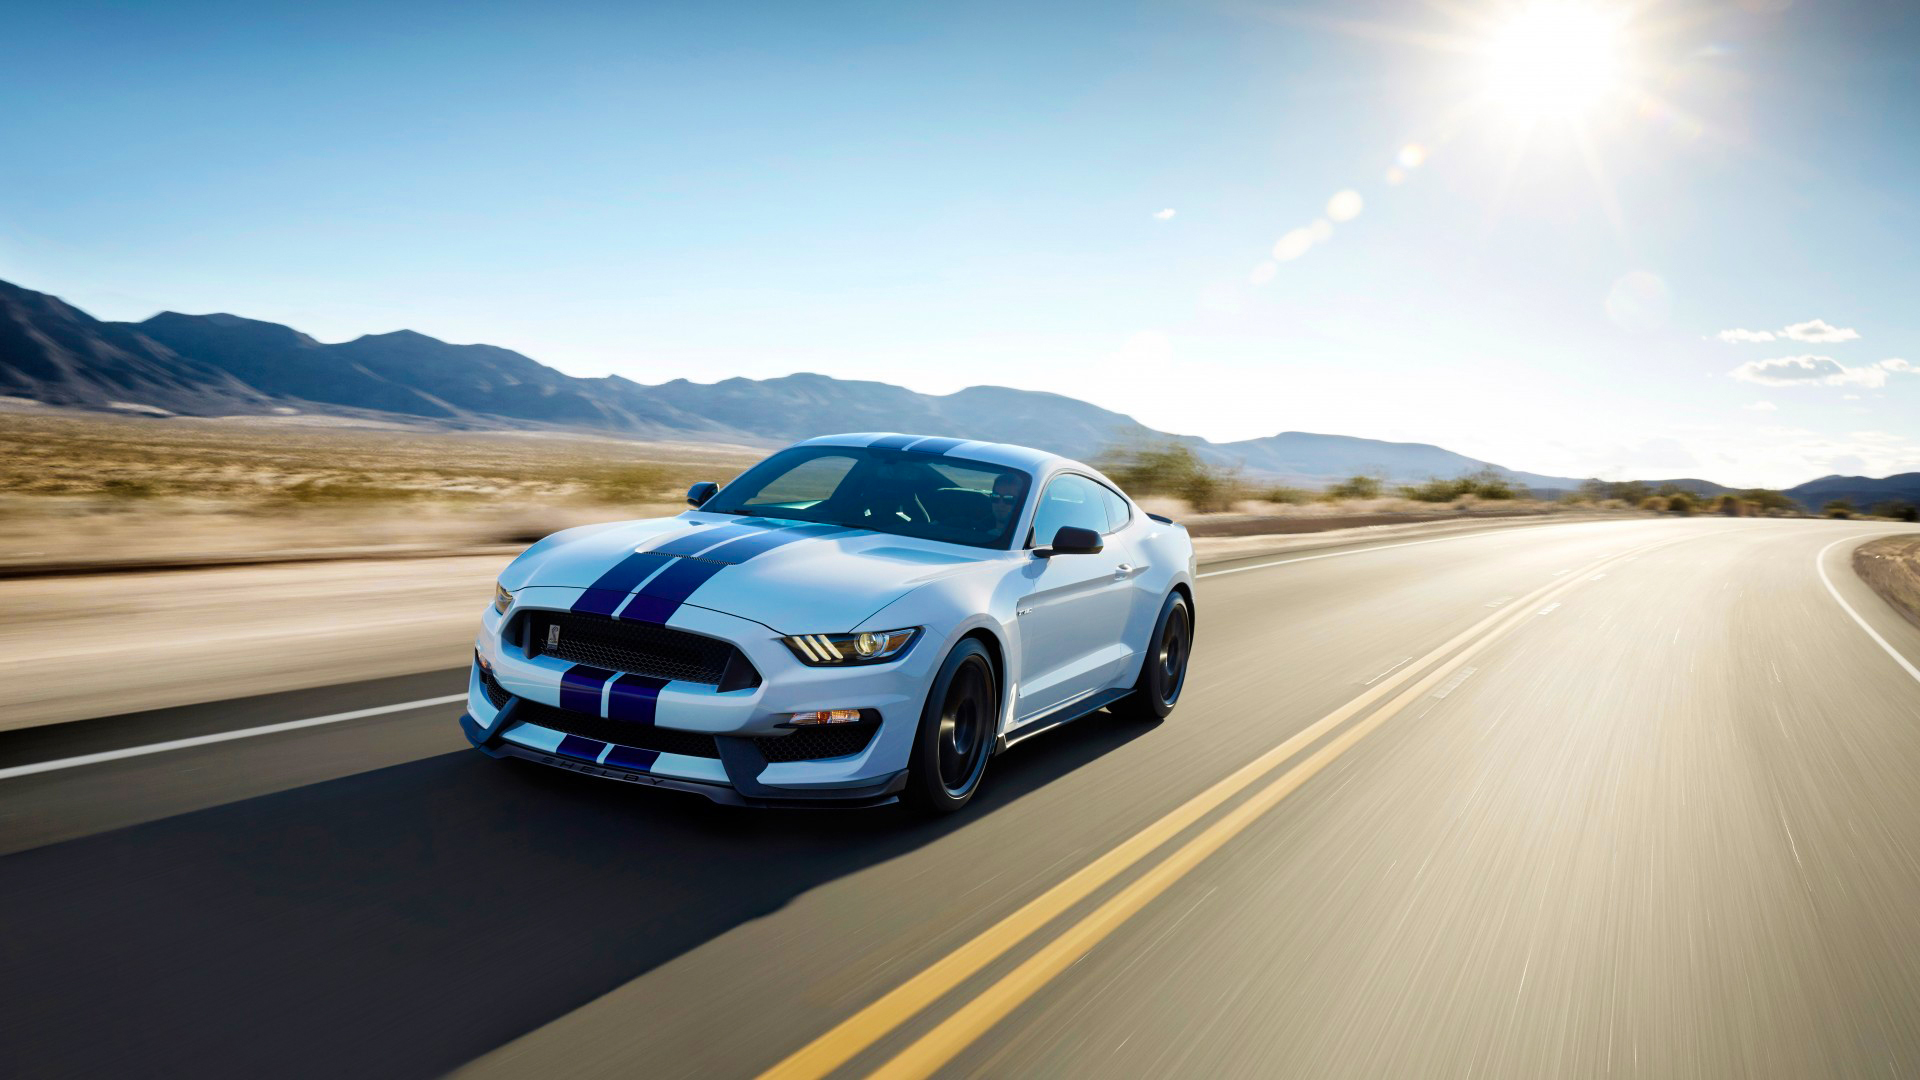 Car Ford Ford Mustang Shelby Gt350 Muscle Car Road Sport Car Vehicle White Car 1920x1080